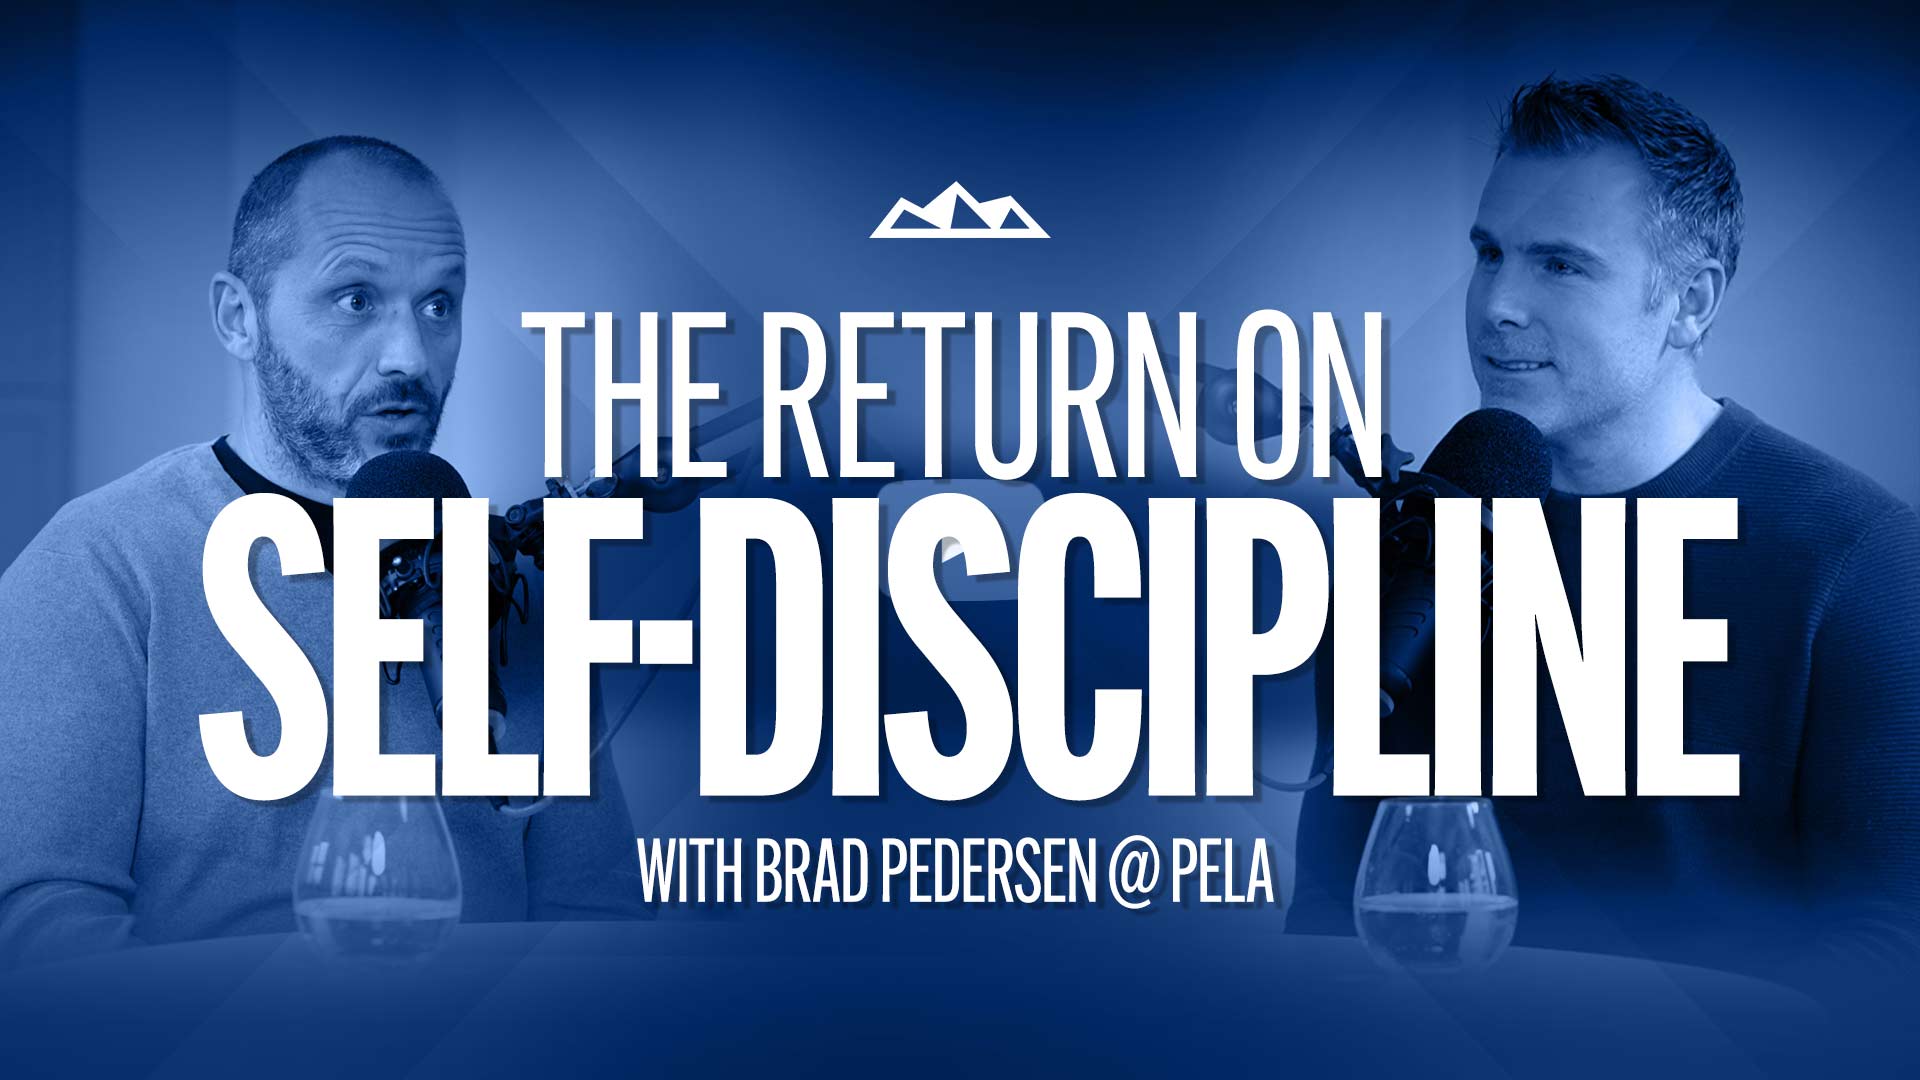 How To Lean On Your Best Self When Life Gets Hard with Brad Pedersen @ Pela